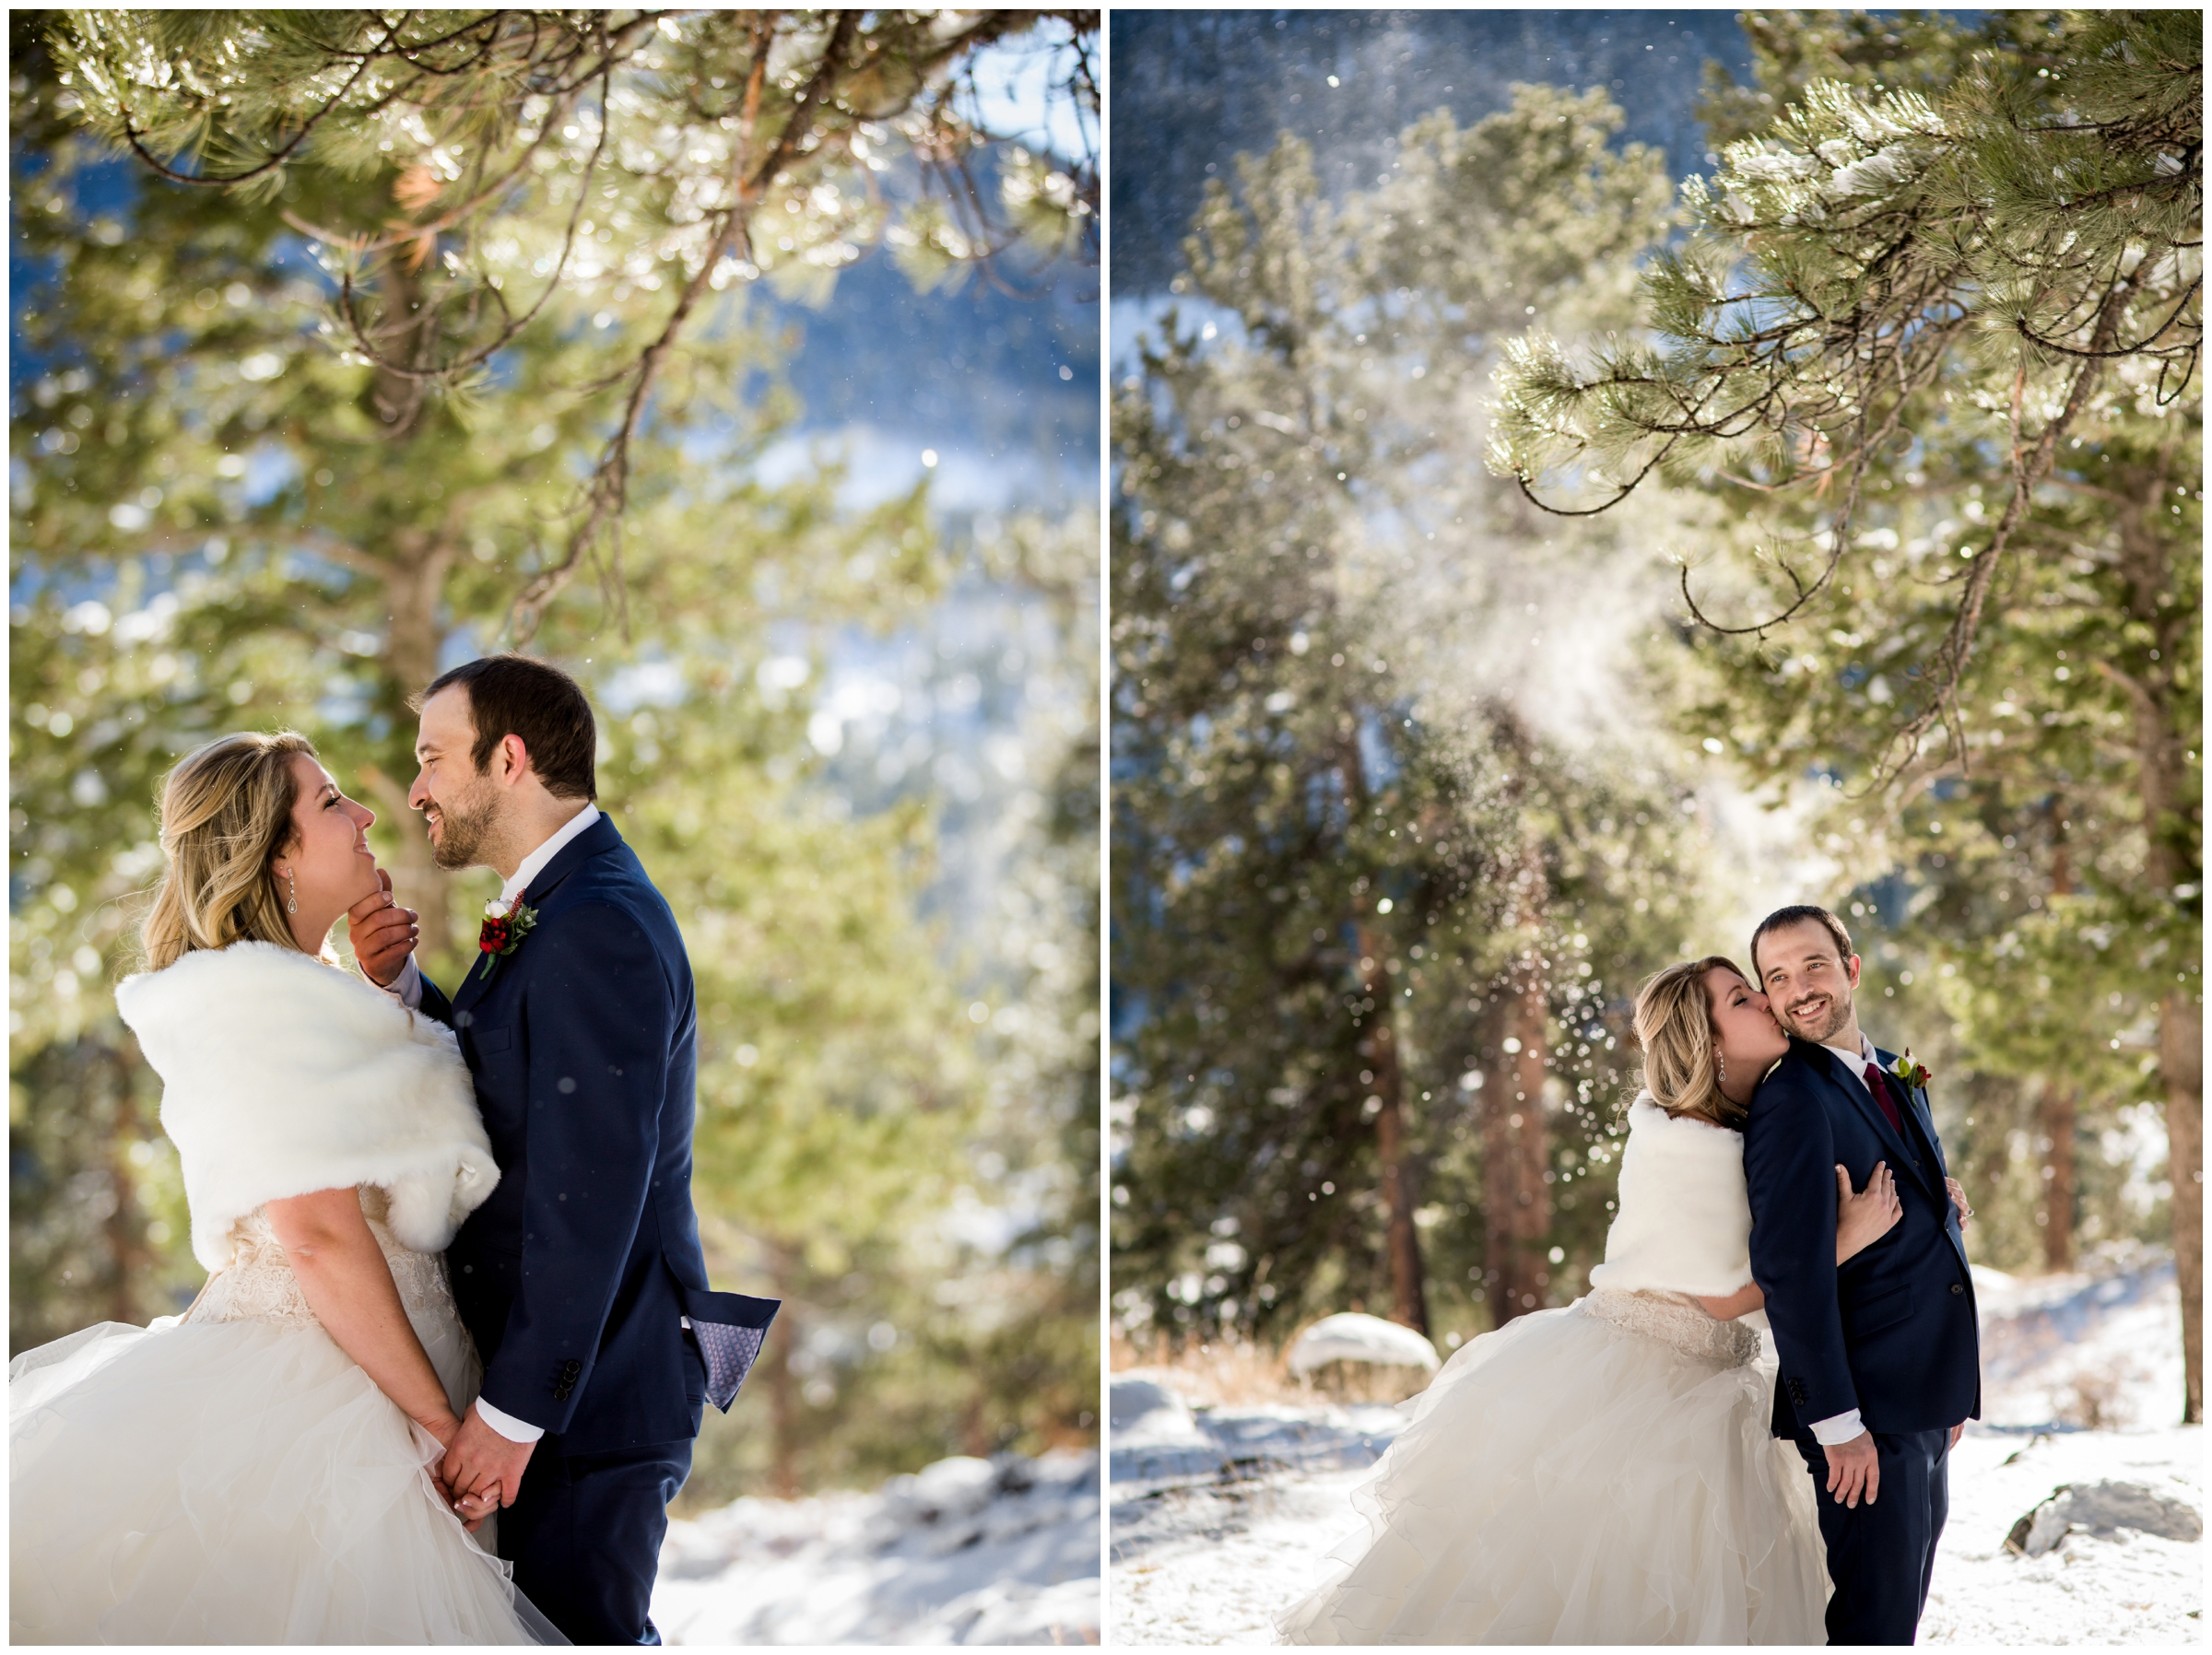 Della Terra wedding photos by award-winning Estes Park Colorado photographer Plum Pretty Photography. Snowy CO winter wedding in mountains with red details.